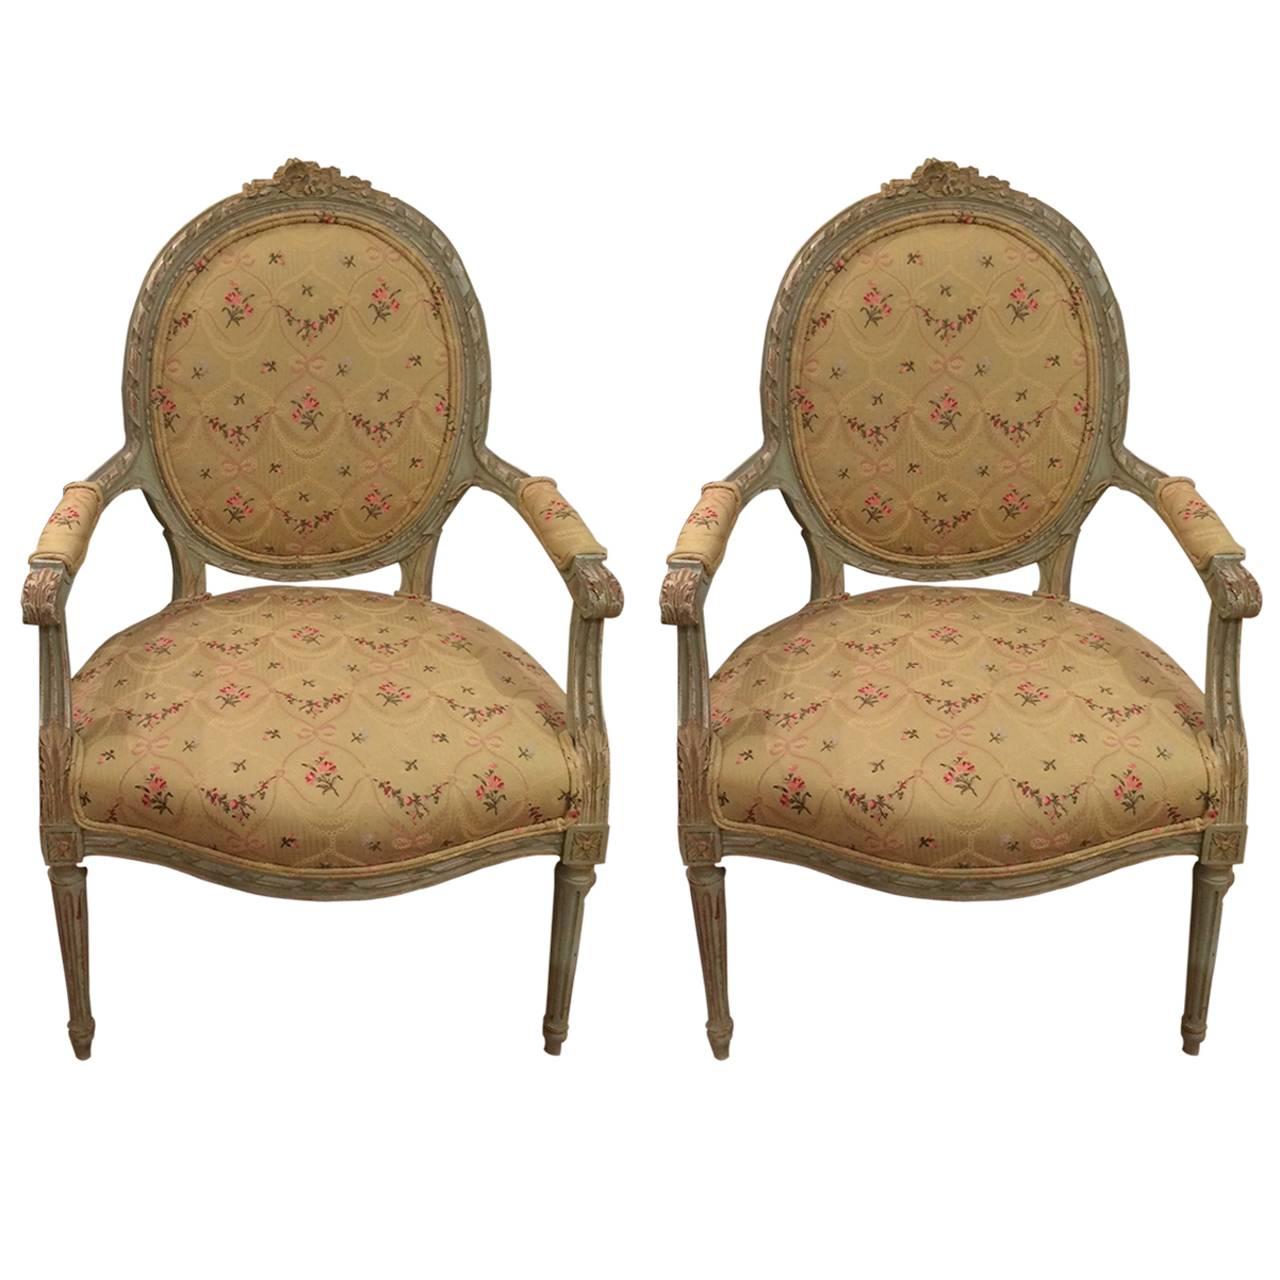 Pair of Celadon Green Painted Louis XVI Style Armchairs Fauteuils